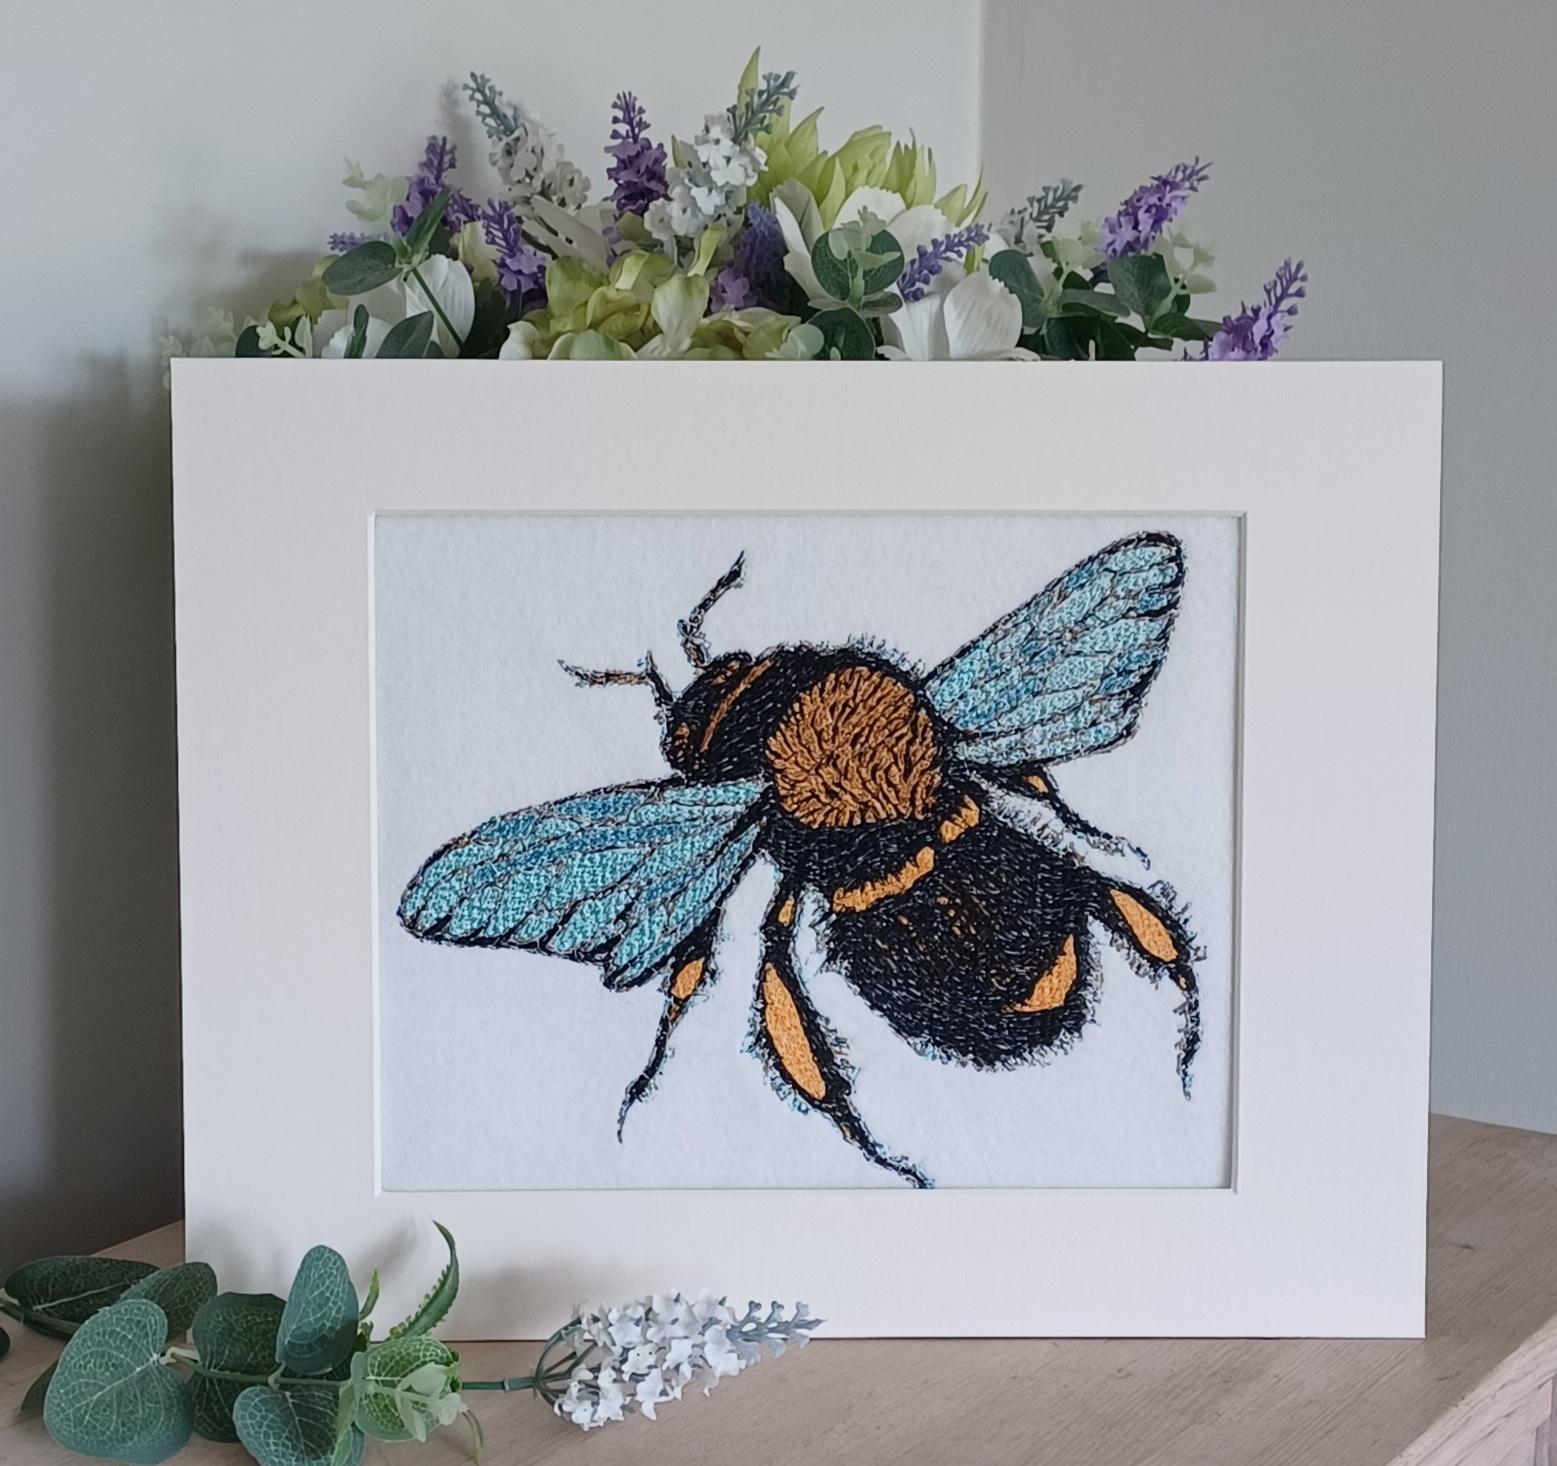 Framed bee embroidery design